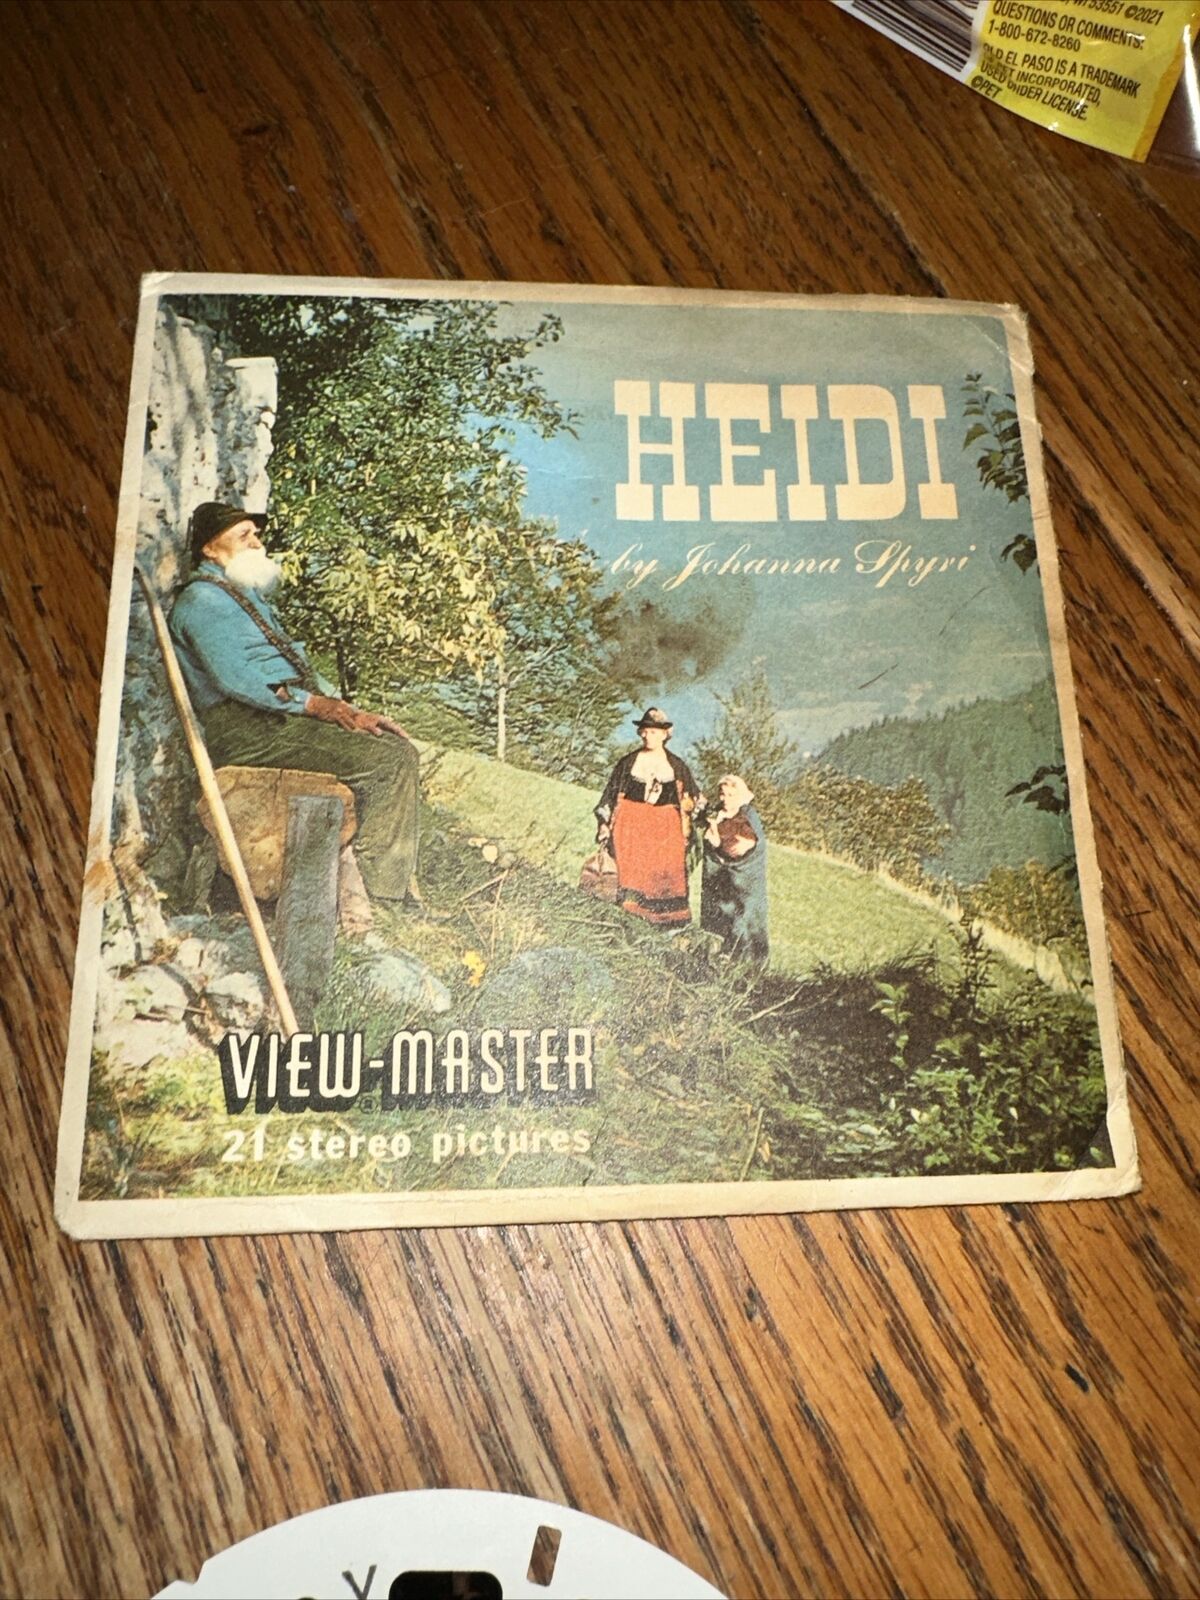 Vintage View-master 3 reel stereo pictures Heidi  B425